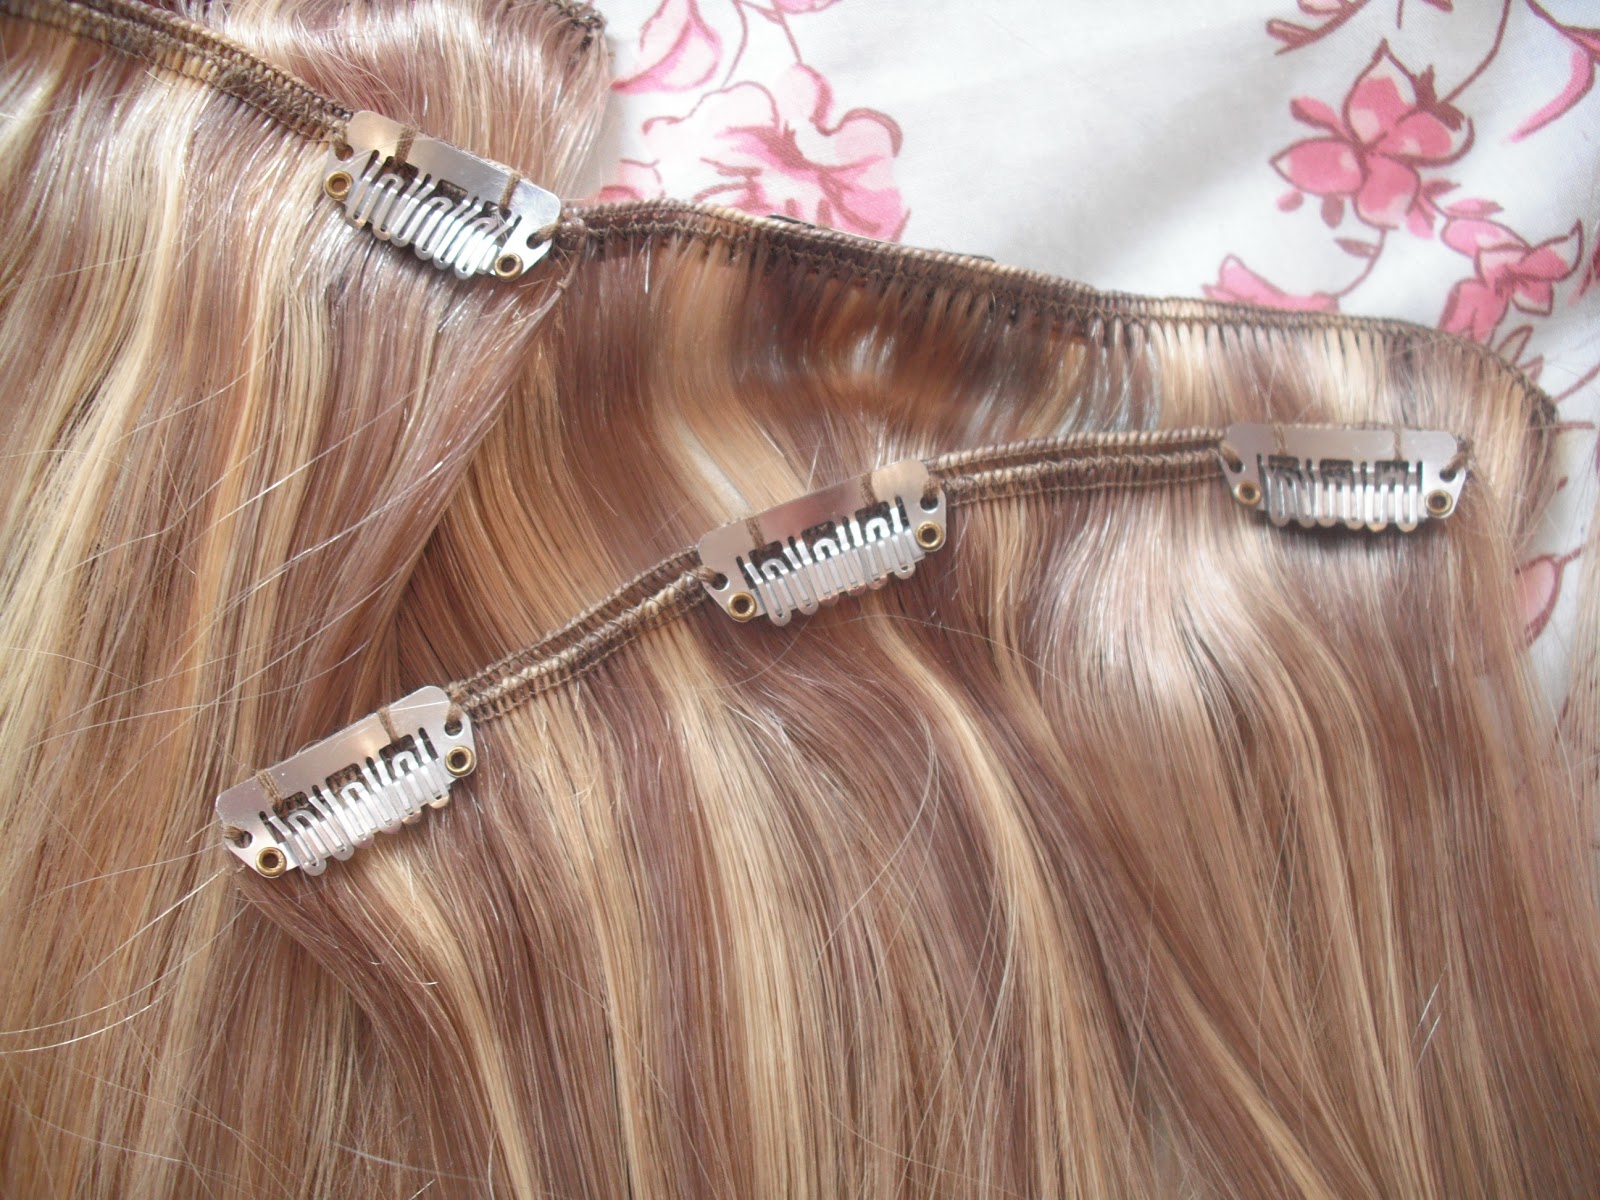 3. Dark Blue Clip In Hair Extensions - Etsy - wide 5